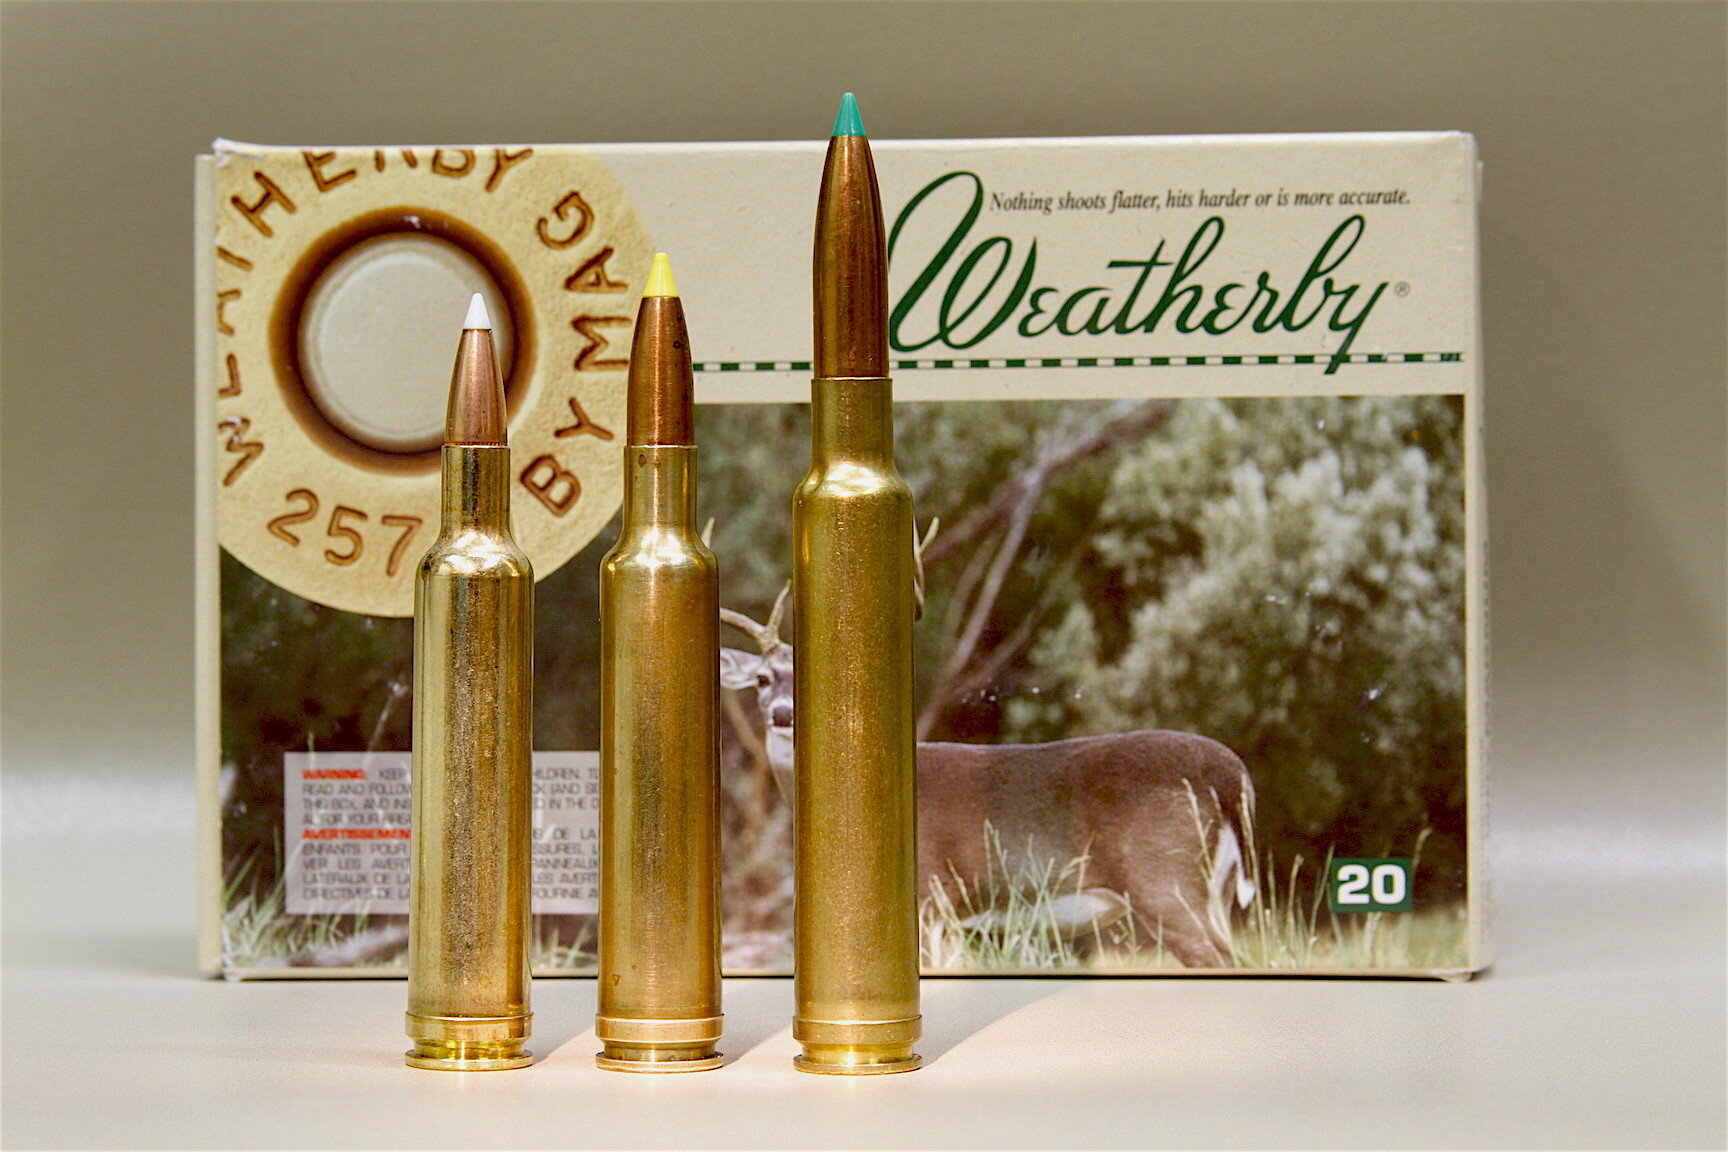 257 Weatherby magnum cartridge and box beside 270 and 300 Weatherby magnums. 